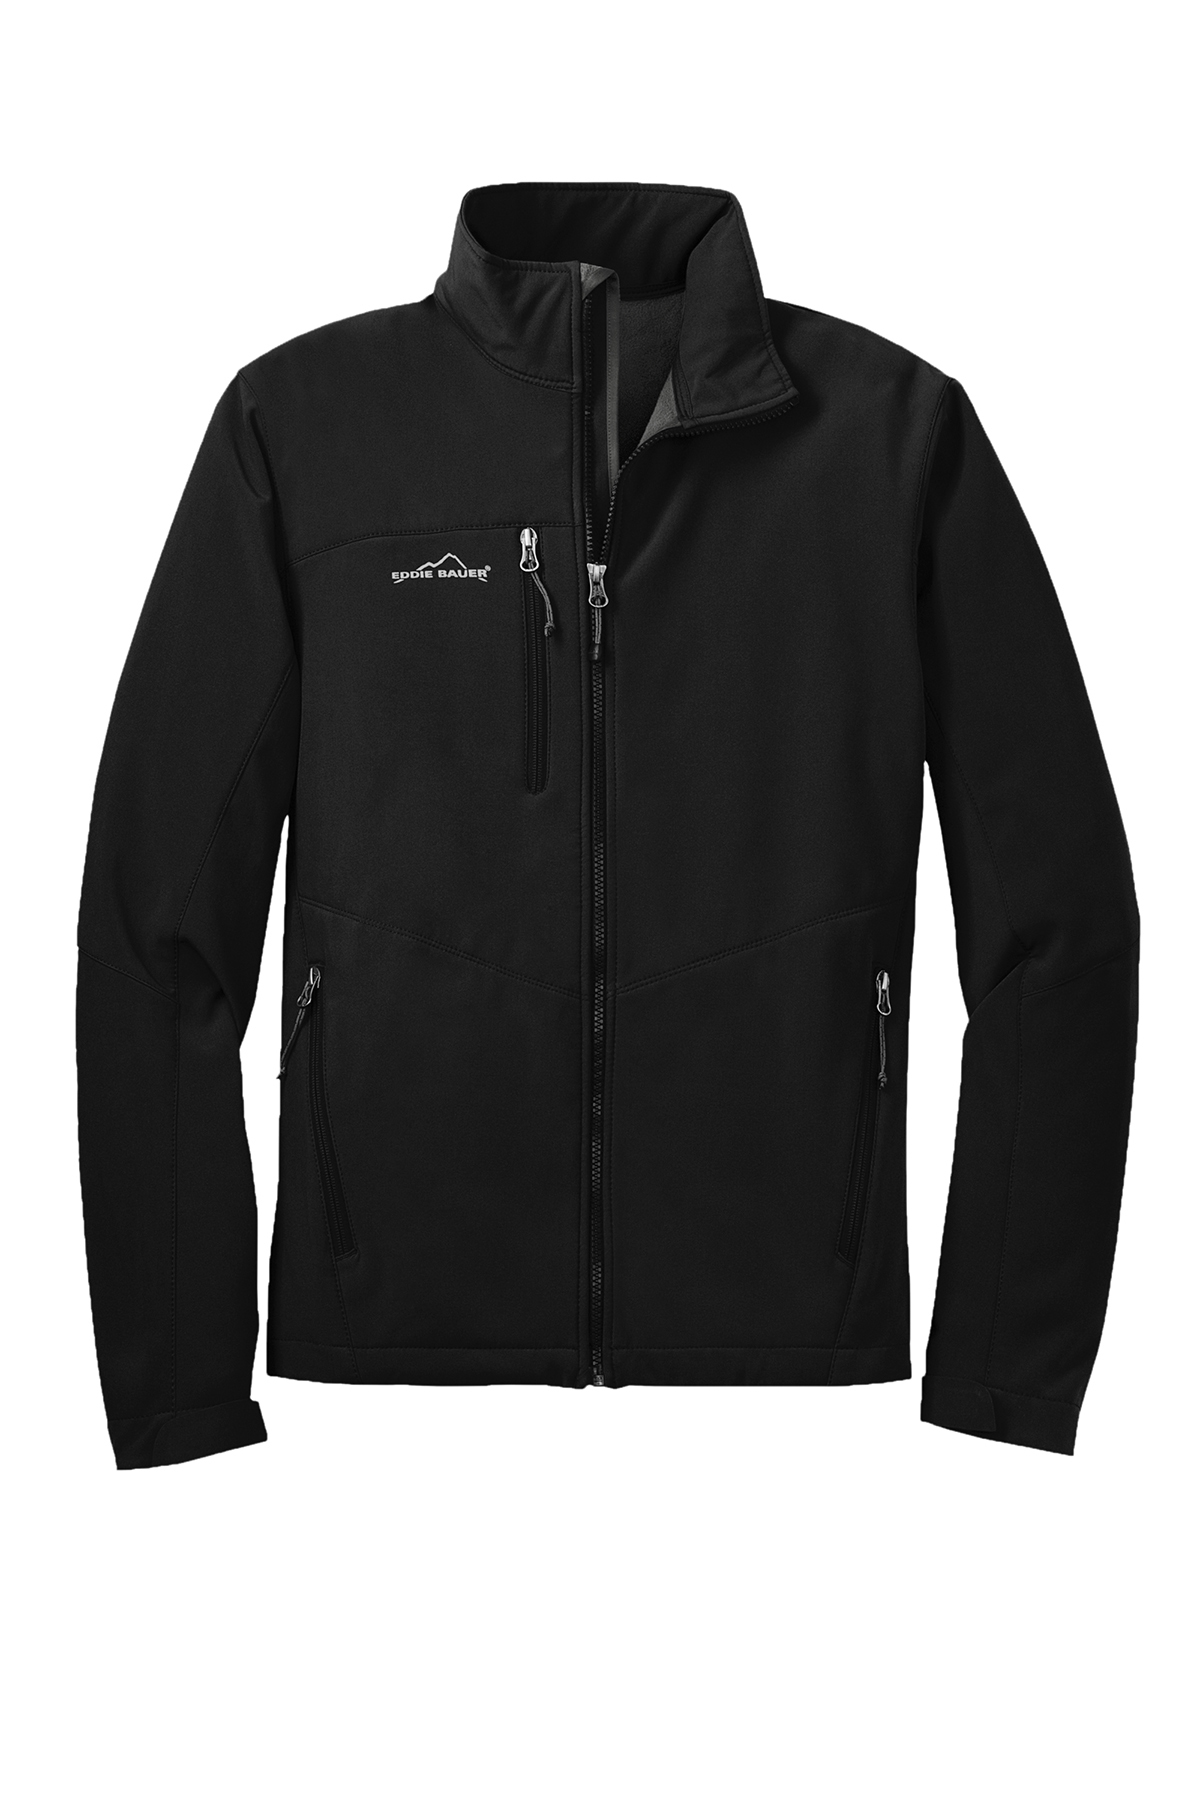 Eddie Bauer - Soft Shell Jacket | Product | Company Casuals